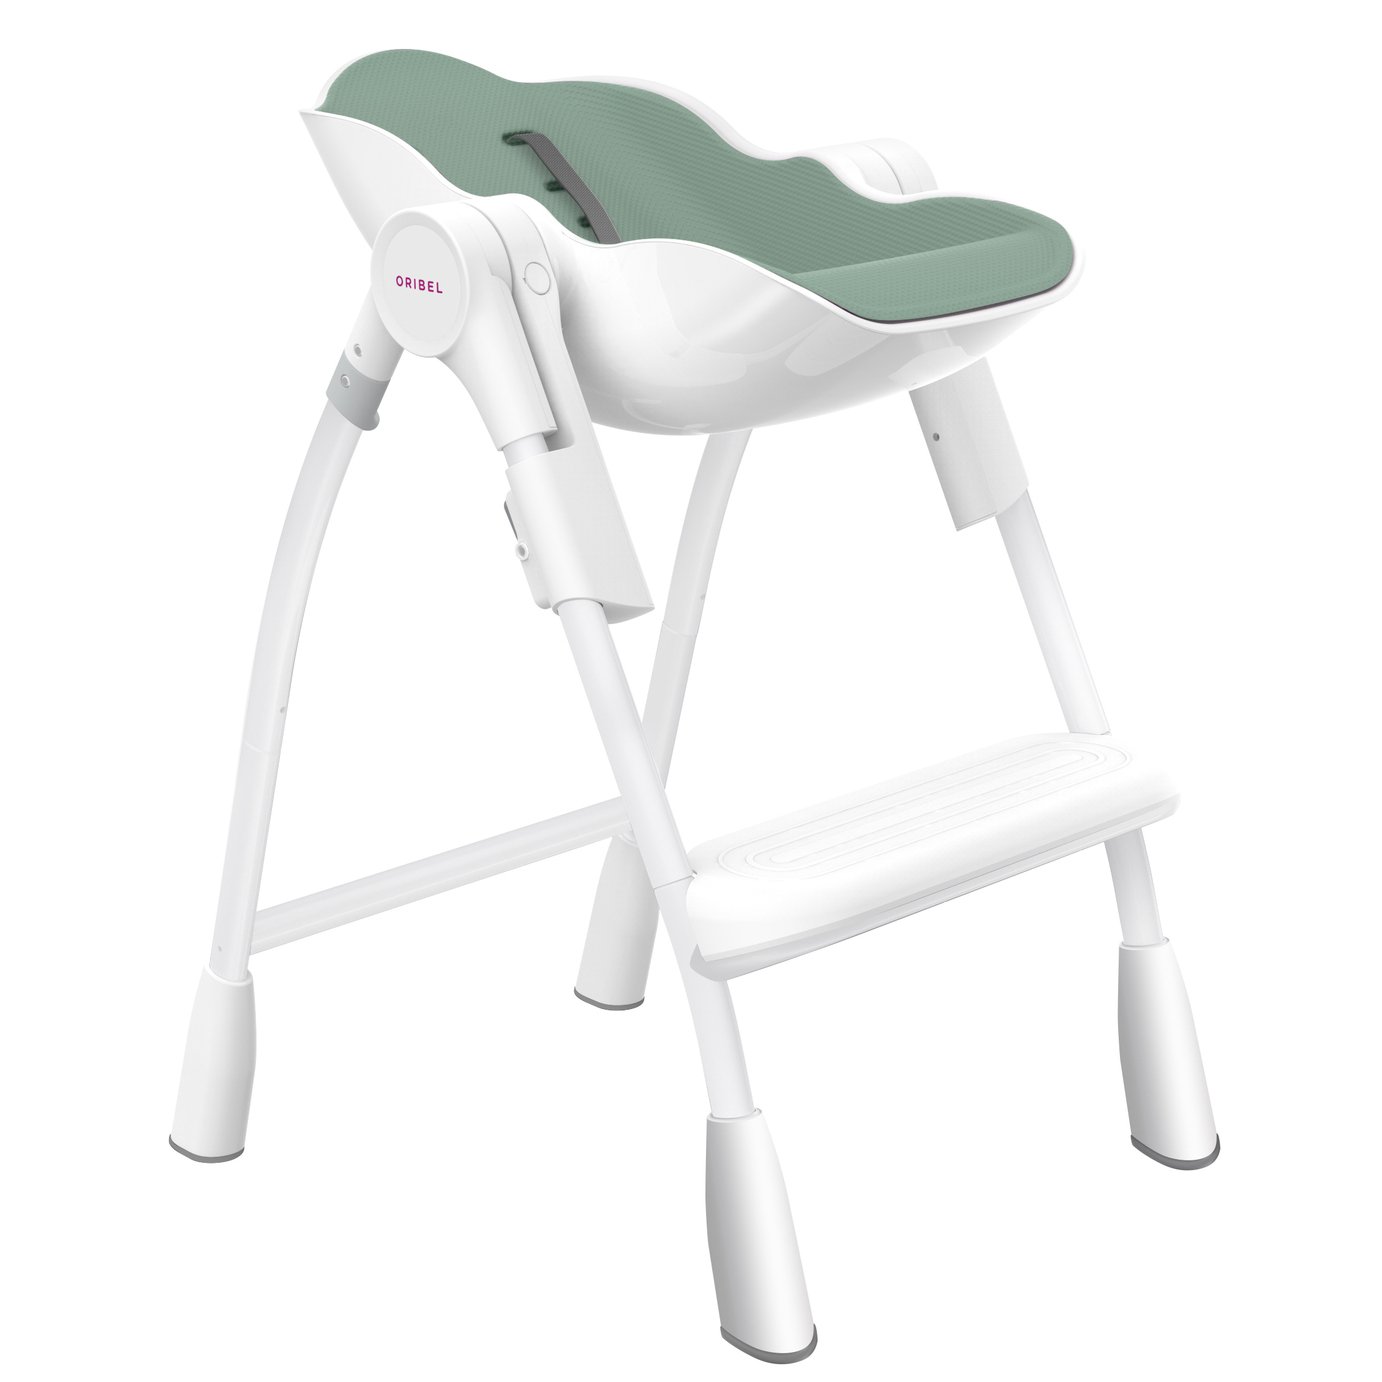 Oribel Cocoon High Chair Review